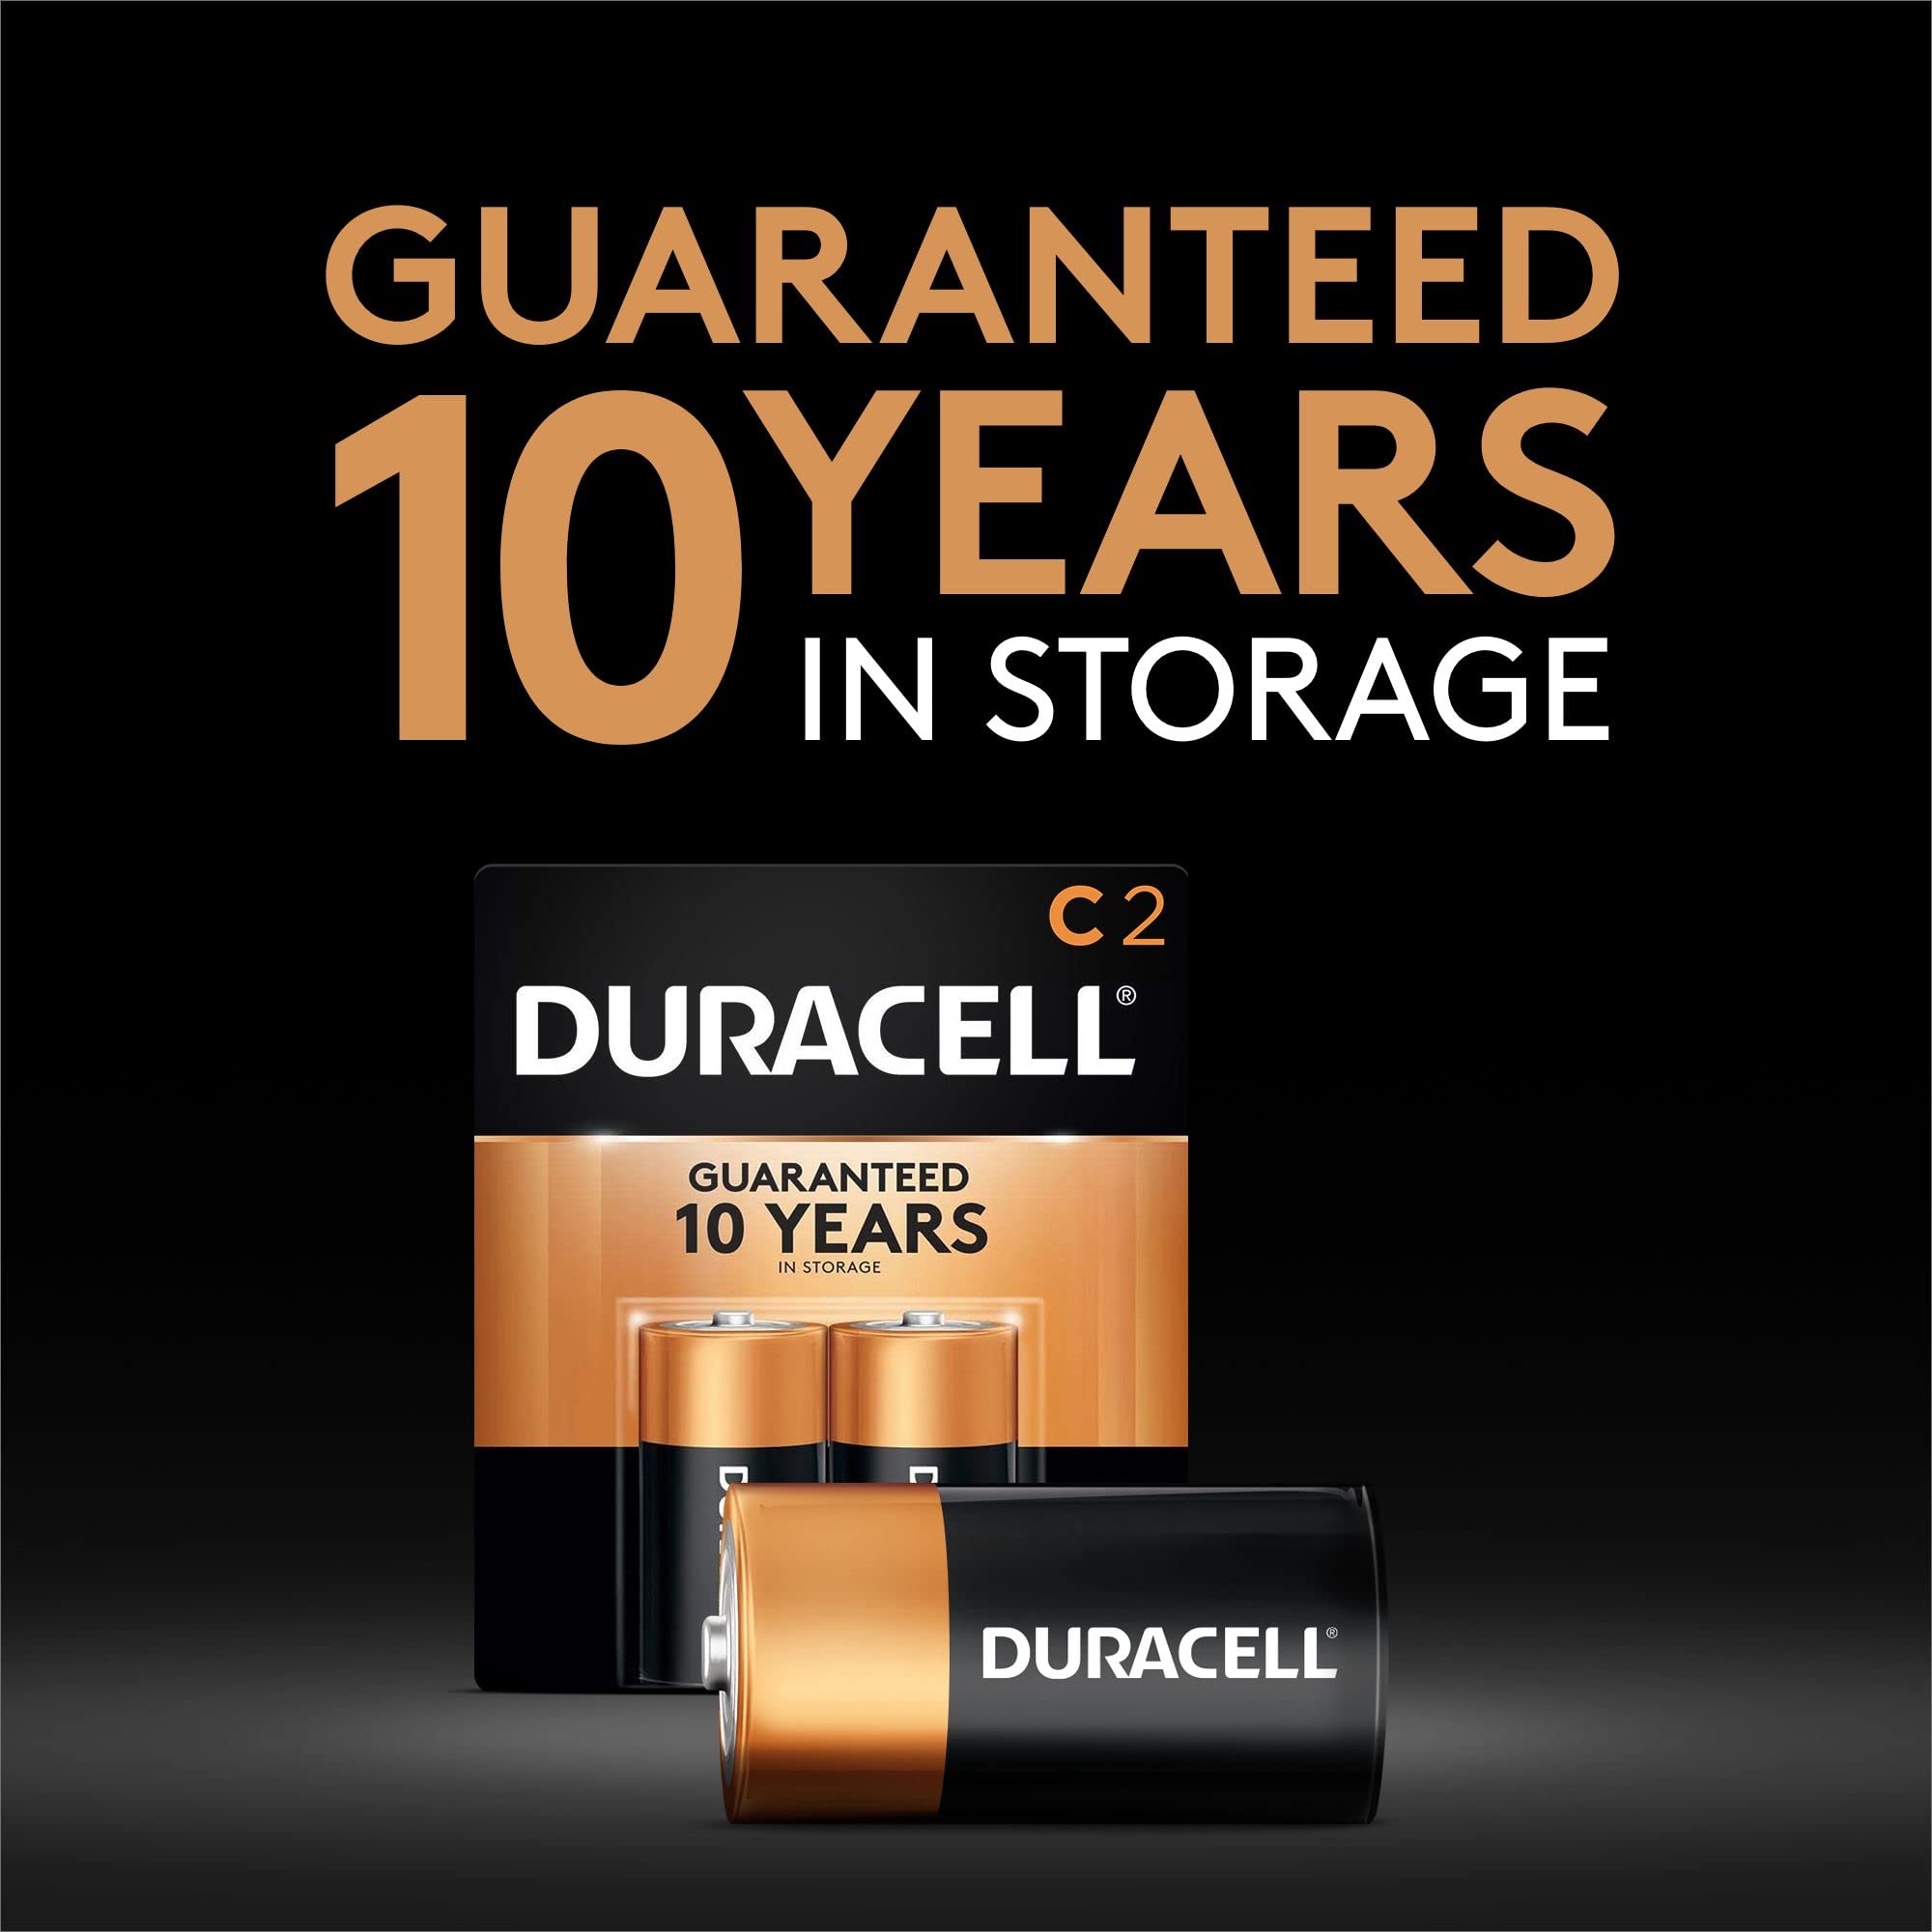 DURACELL Coppertop 1.5V Size C Alkaline Battery, (Pack of 2) - image 3 of 5